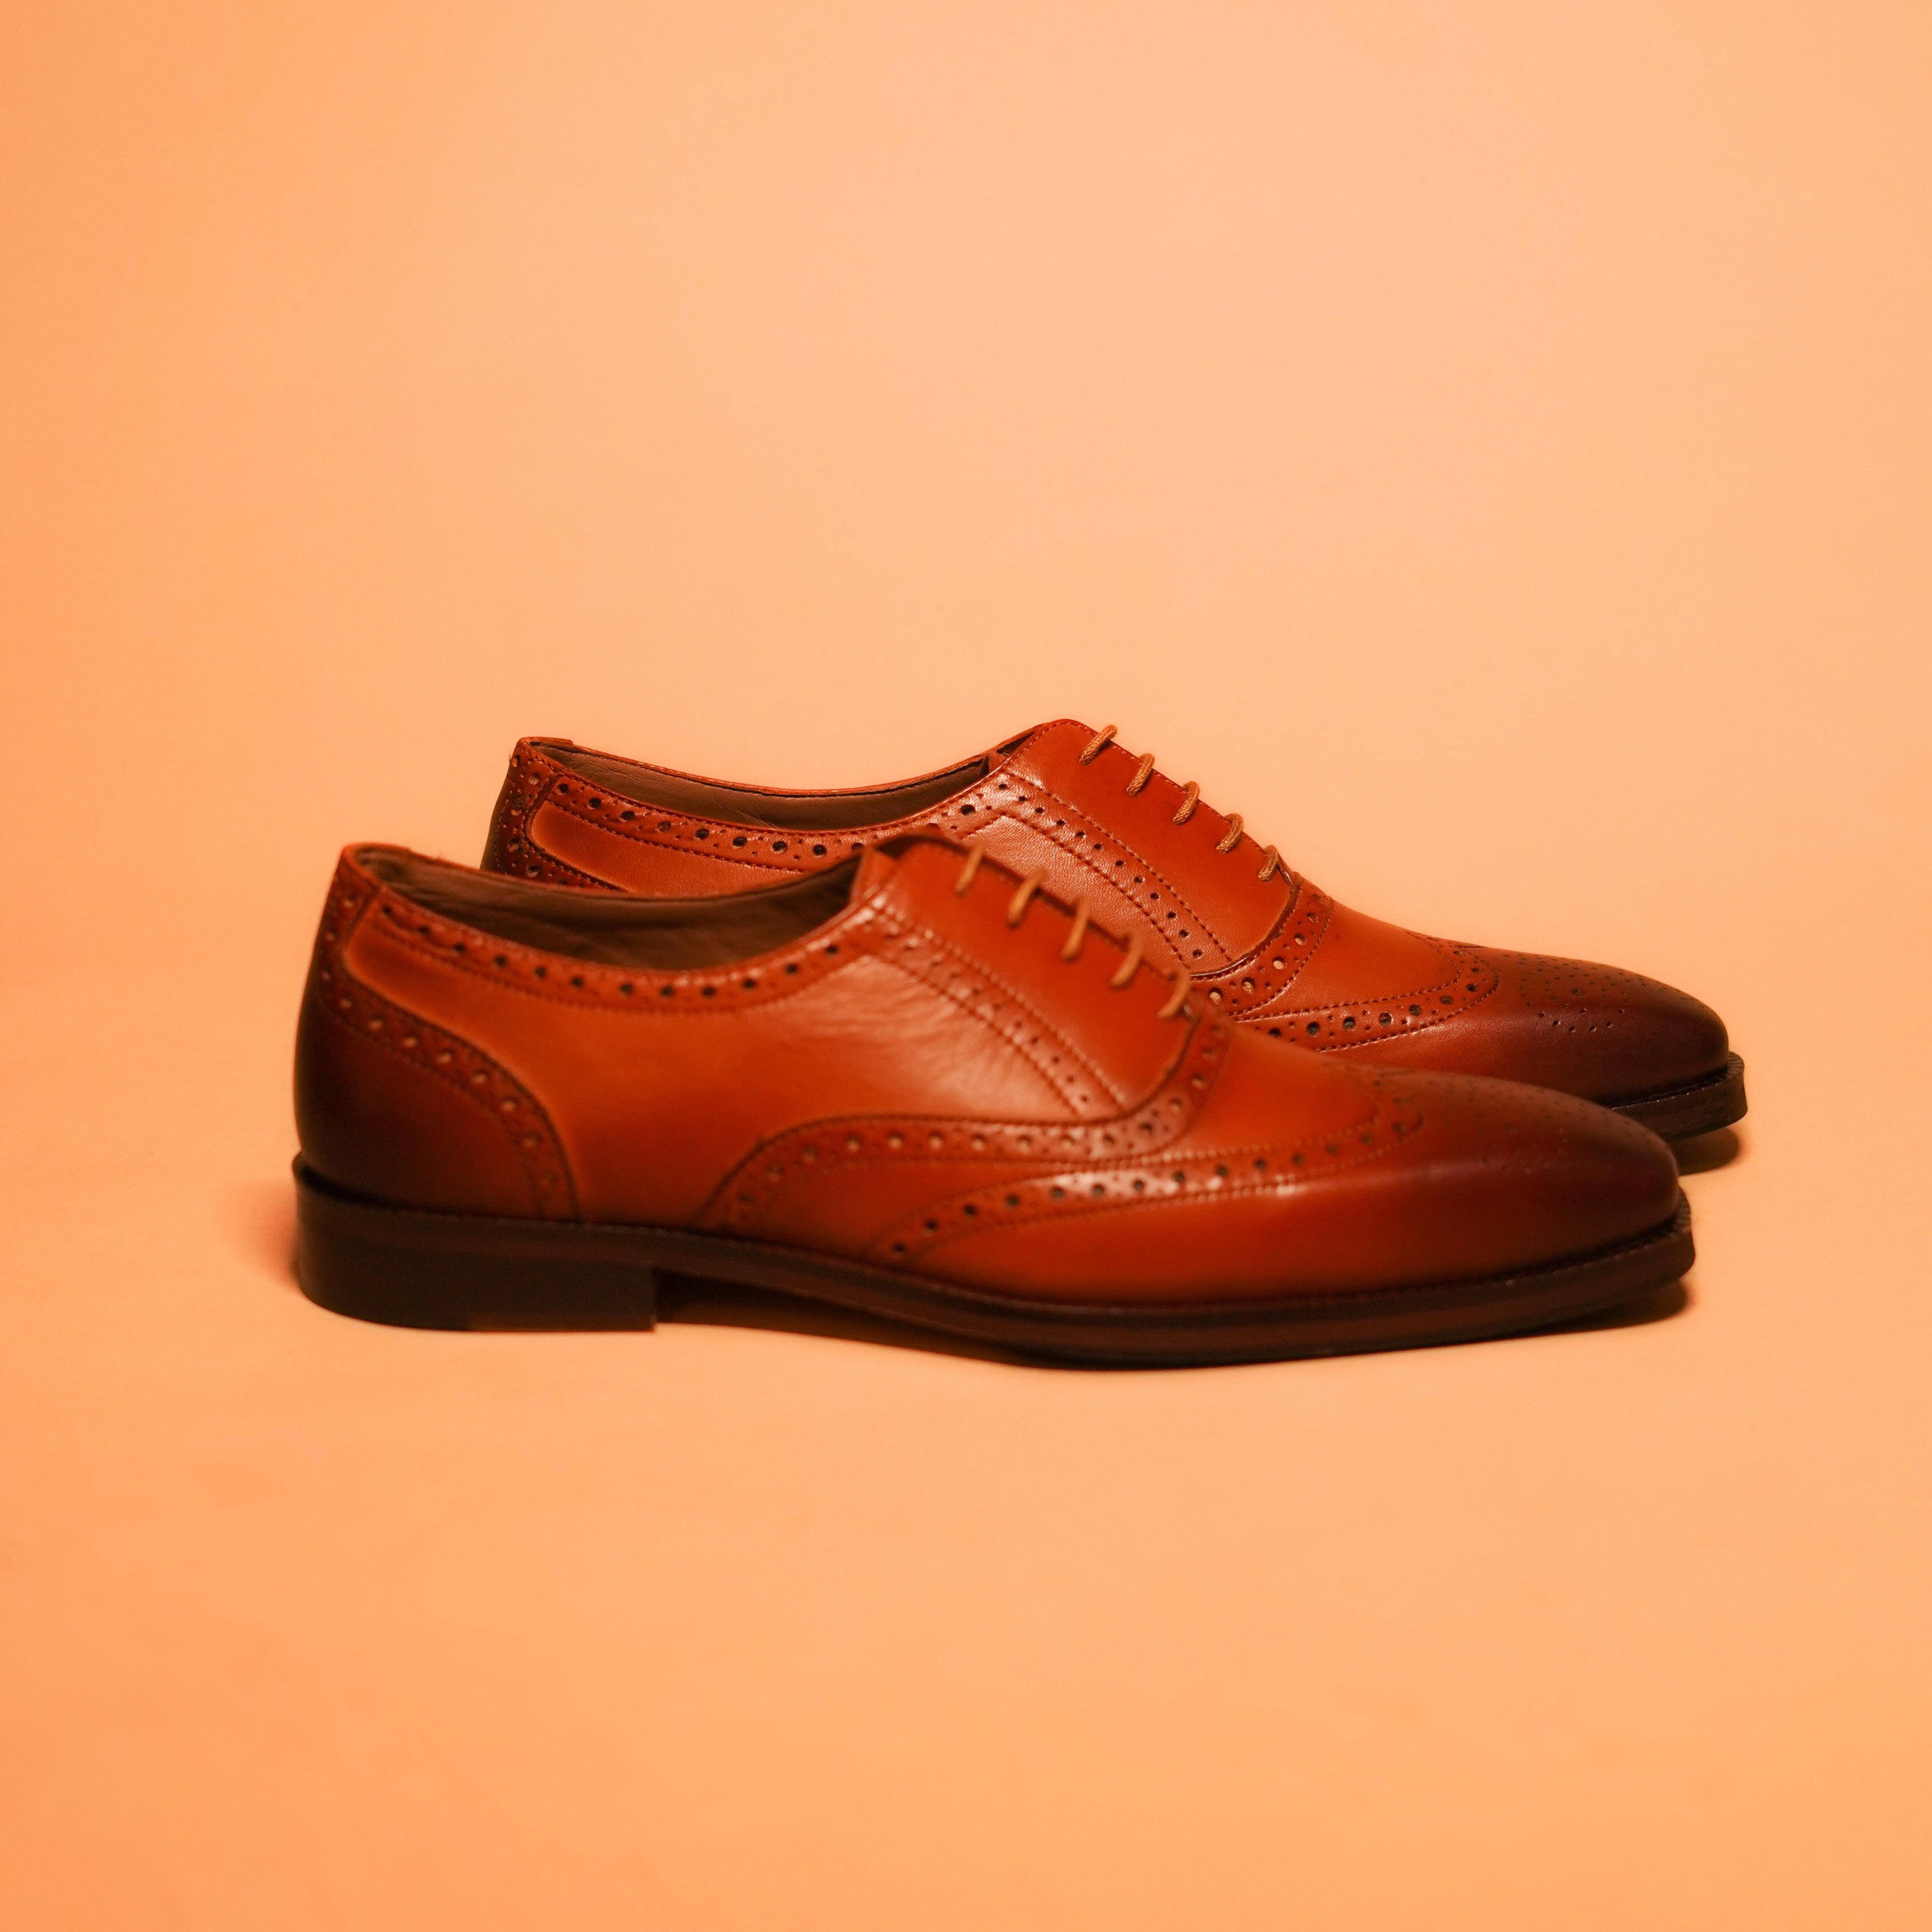 Tanino Bronzo styling, brogue Oxford with suits, versatile men's footwear, formal and semi-formal pairing, DModot shoe collection, outfit inspiration with Tanino Bronzo.